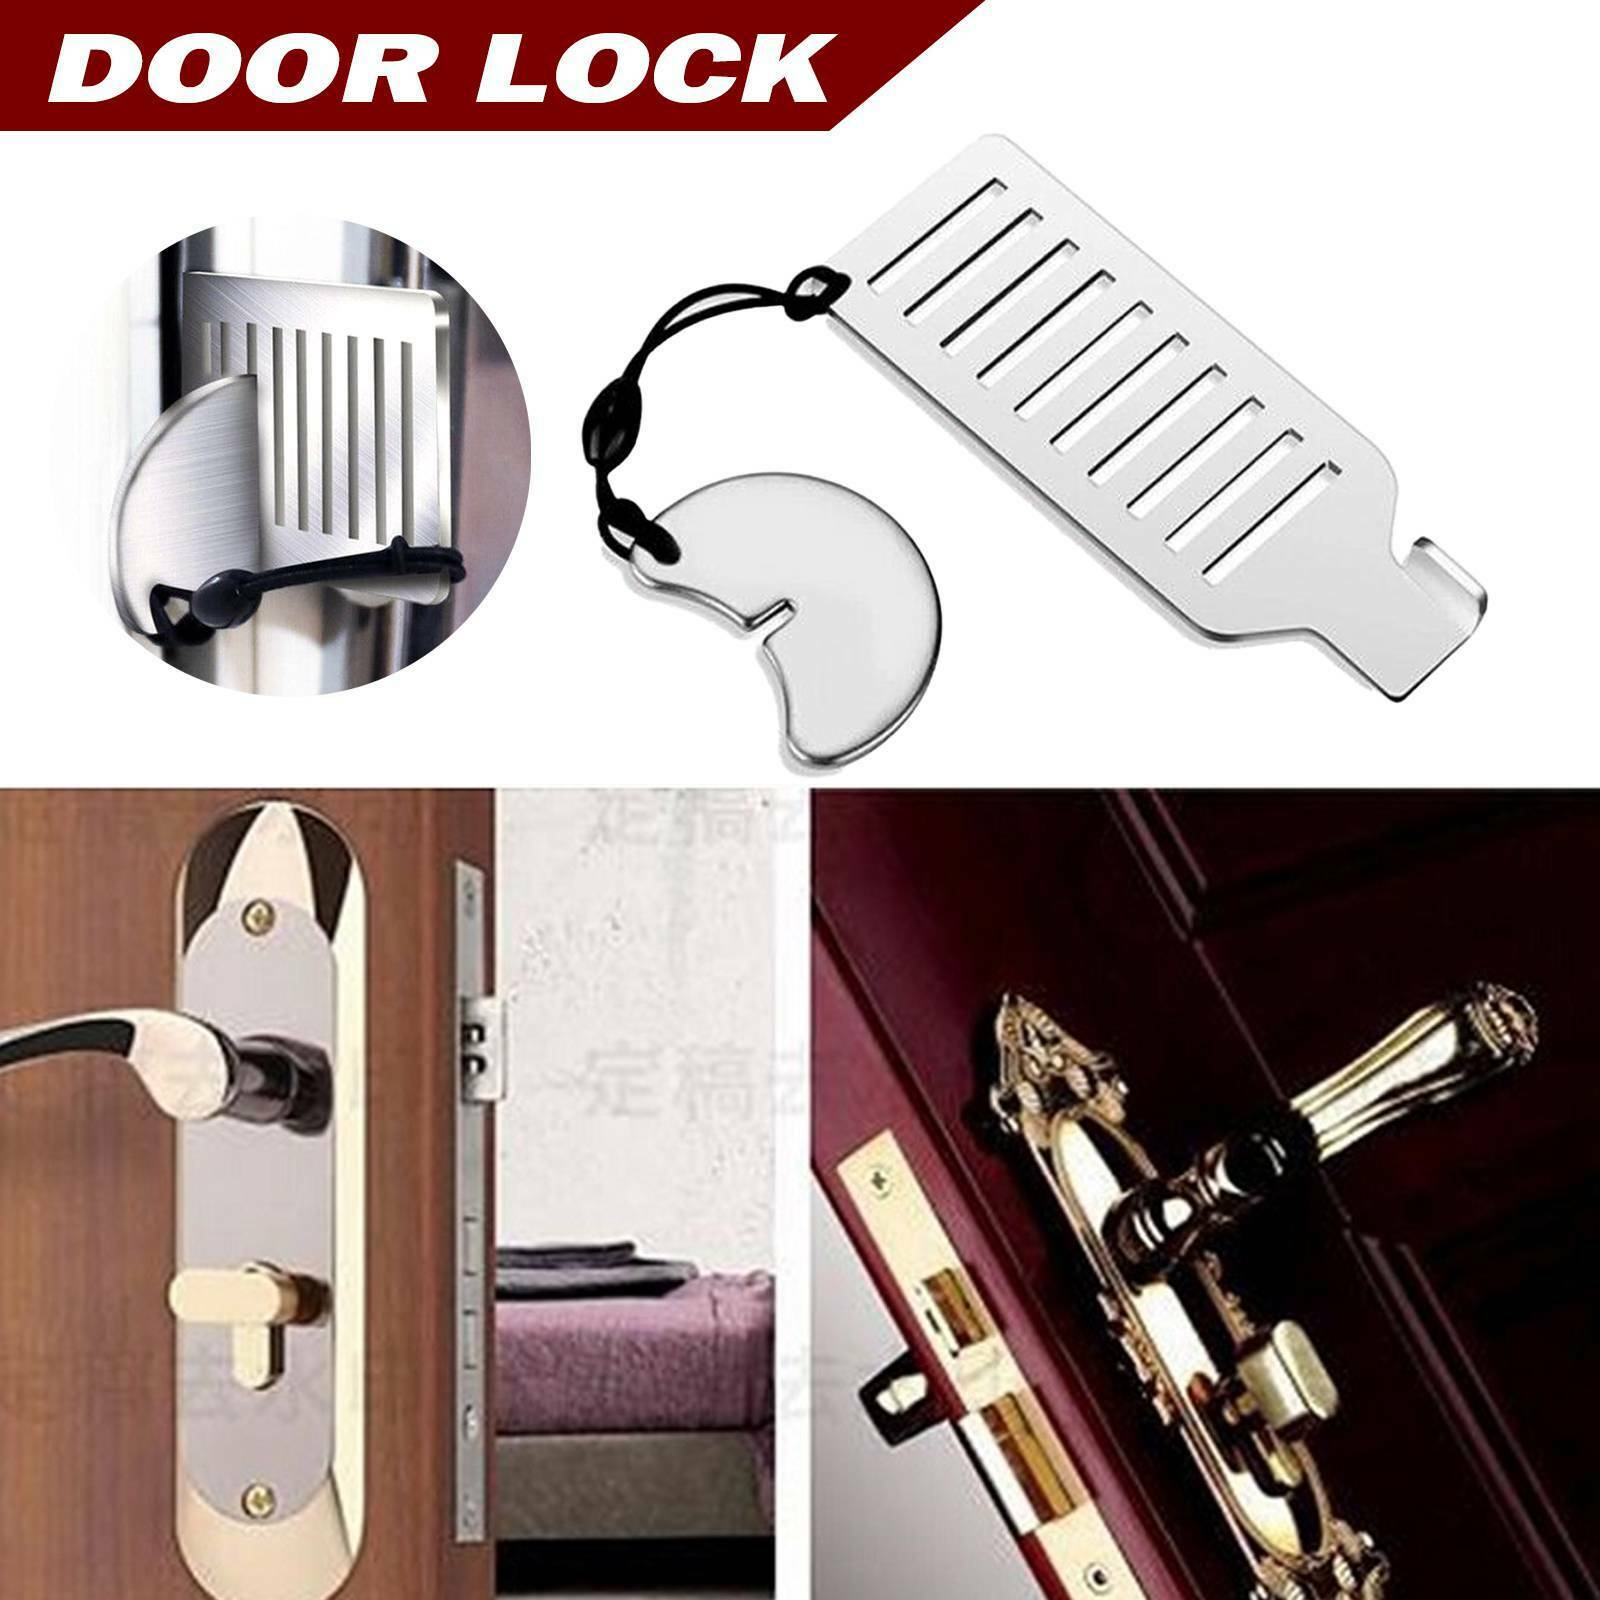 1 Set Door Lock Hardware Safety Security Tool Home Privacy Travel Hotel Portable